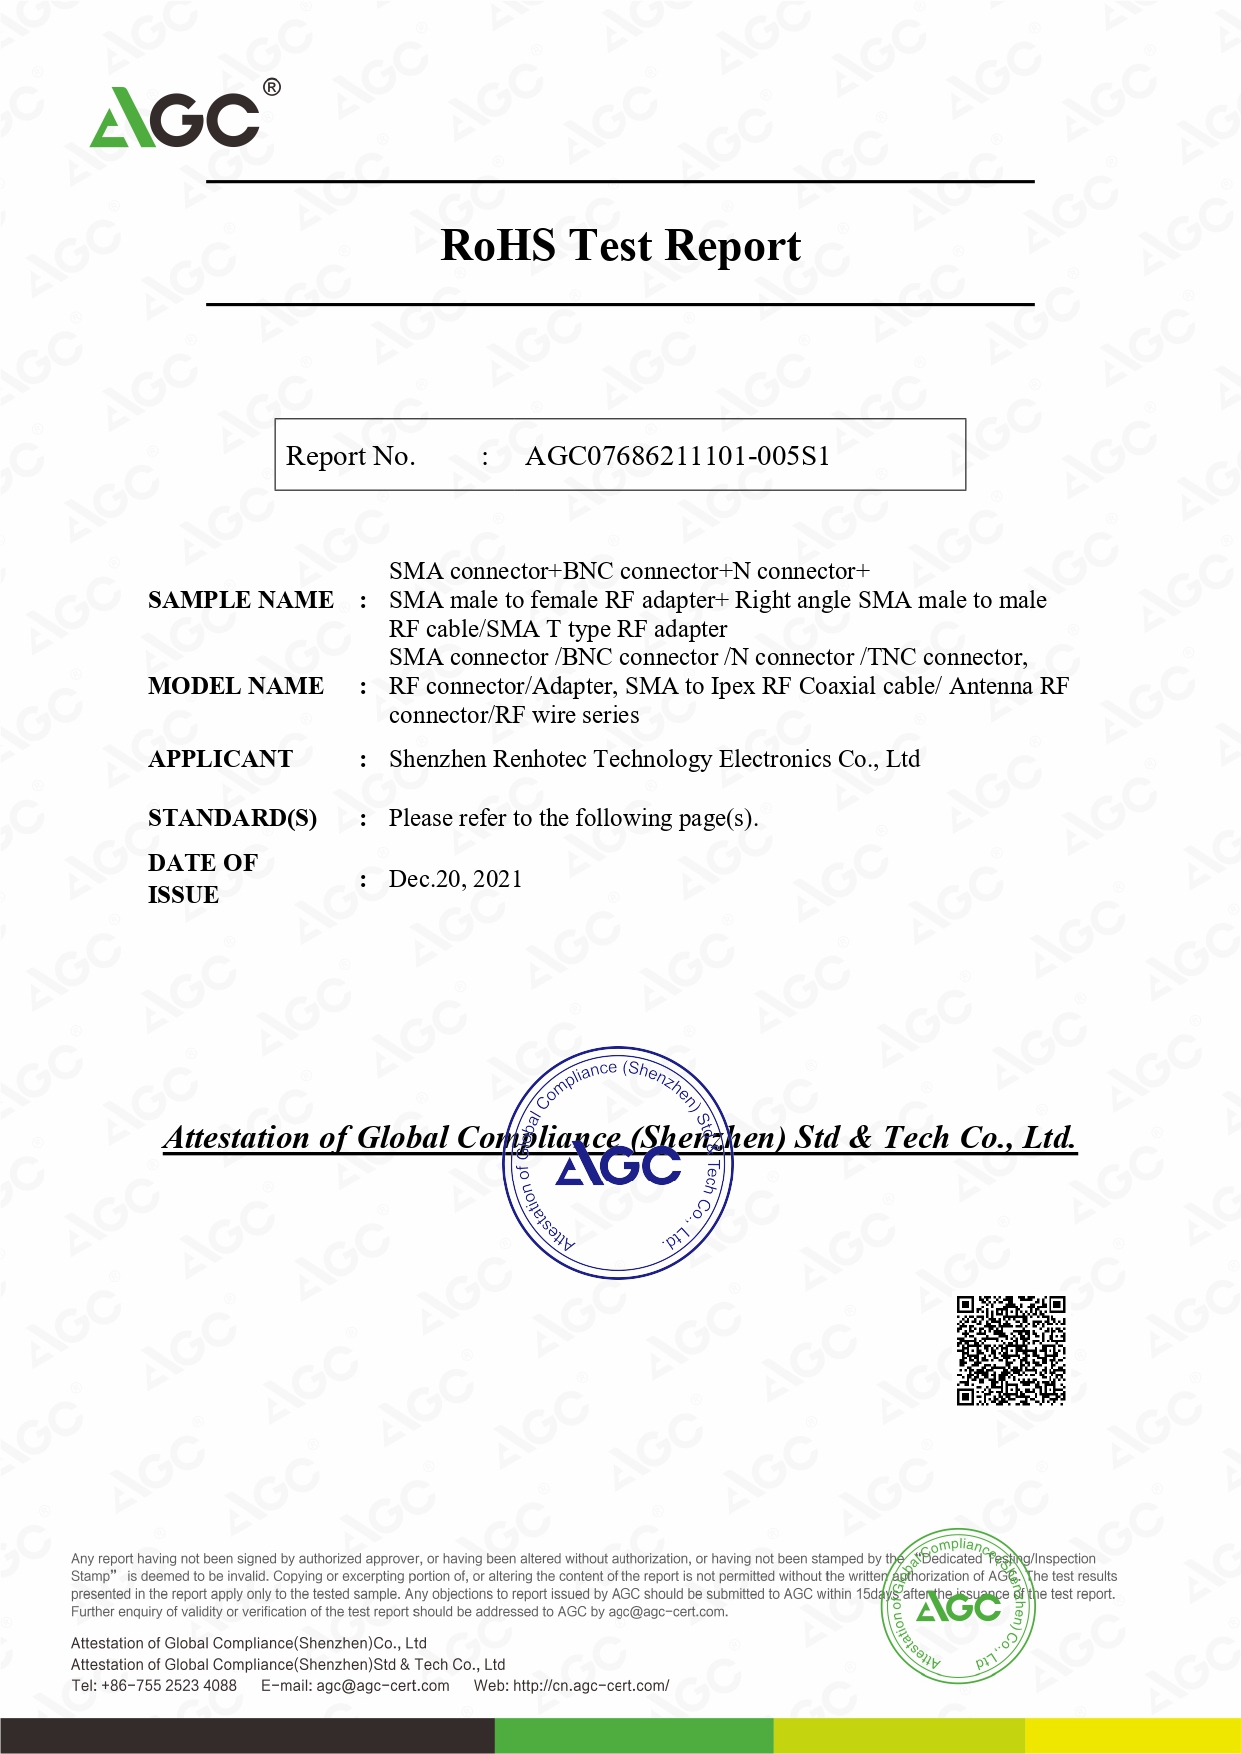 AGC07686211101-005S1   ROHS Test Report   RF connector/cable/adapter